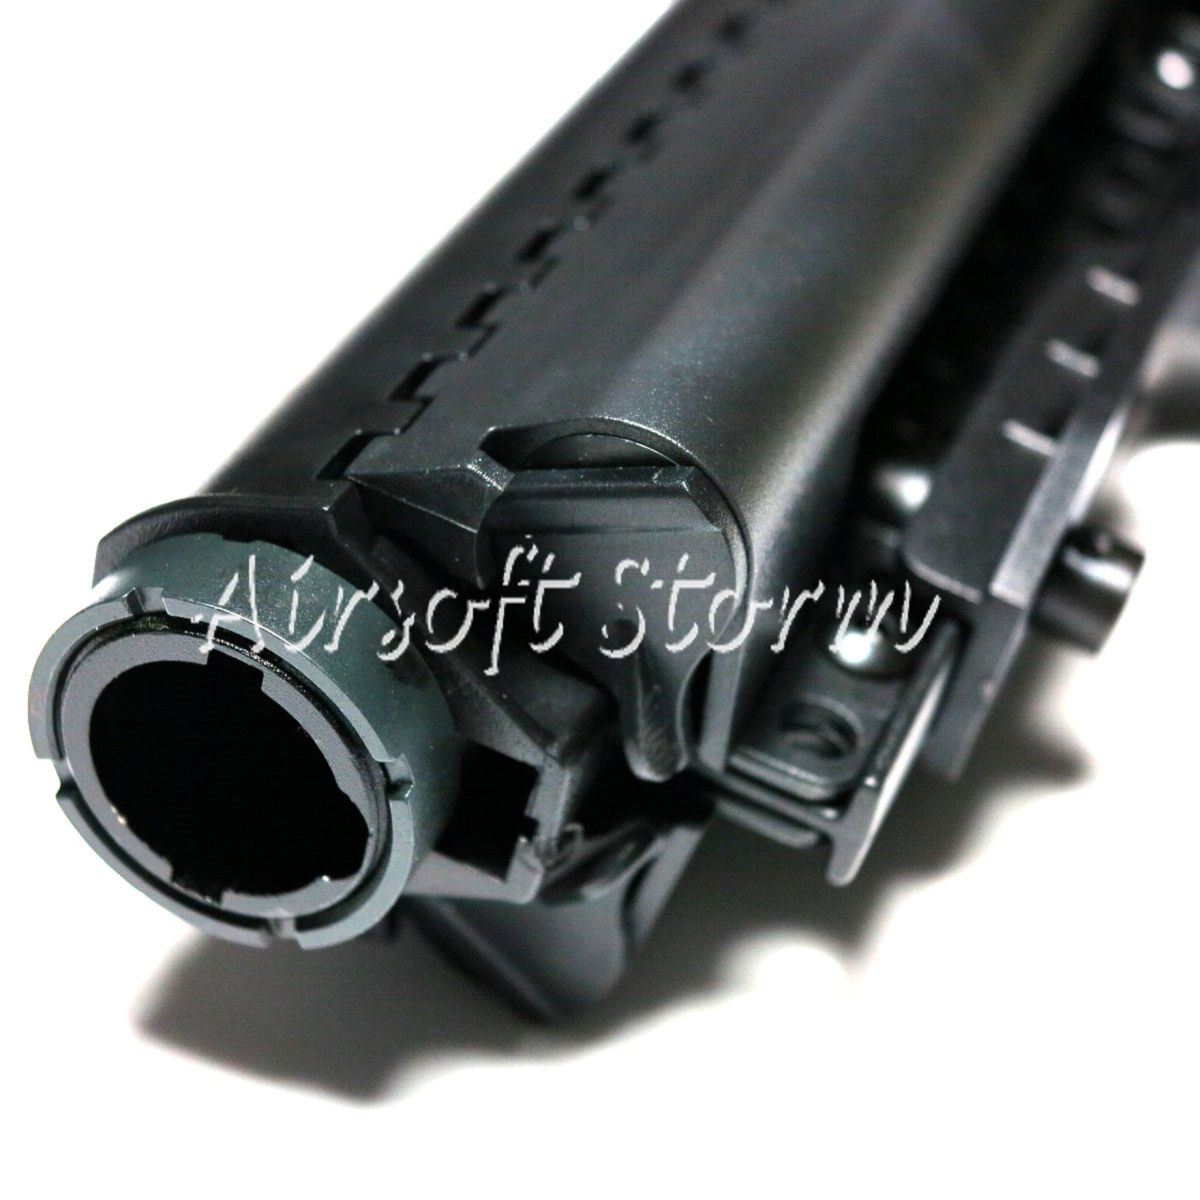 Airsoft Tactical Gear D-Boys Clubfoot MOD Stock for Airsoft AEG M4 / M16 Black - Click Image to Close